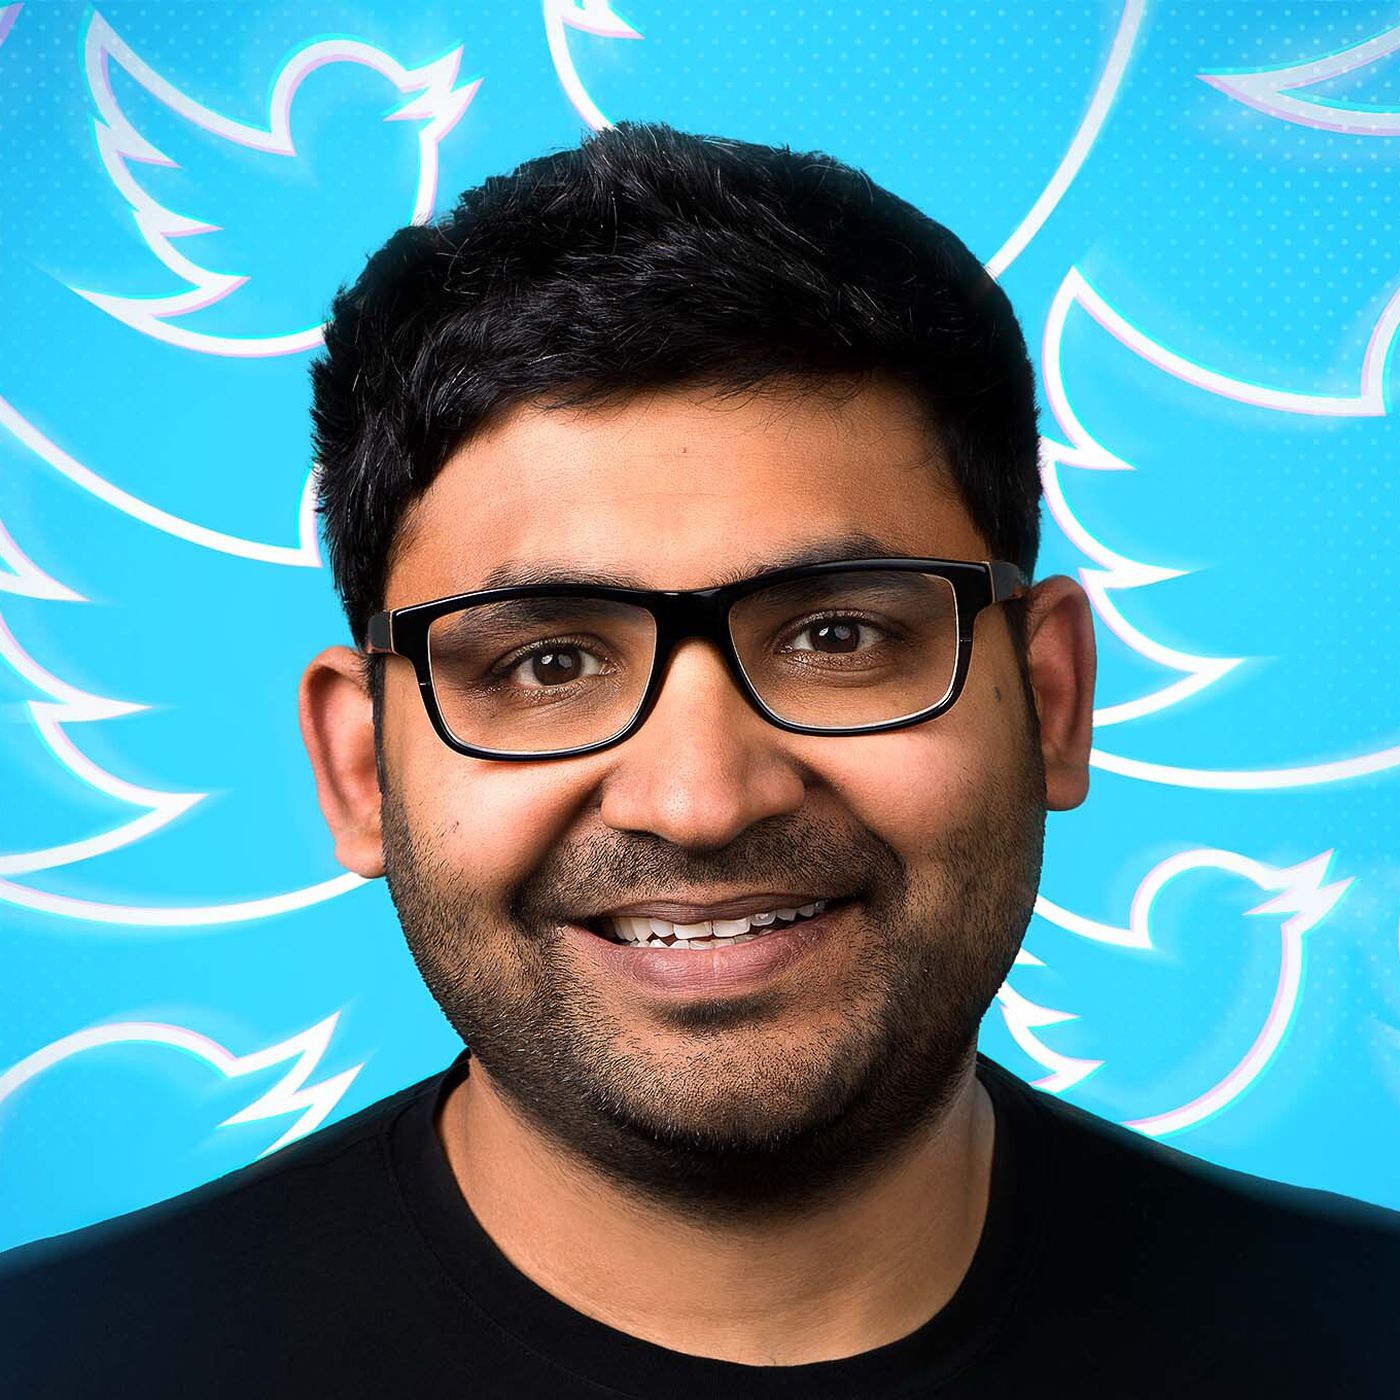 Twitter’s new CEO Parag Agrawal desires the organization to move much quicker